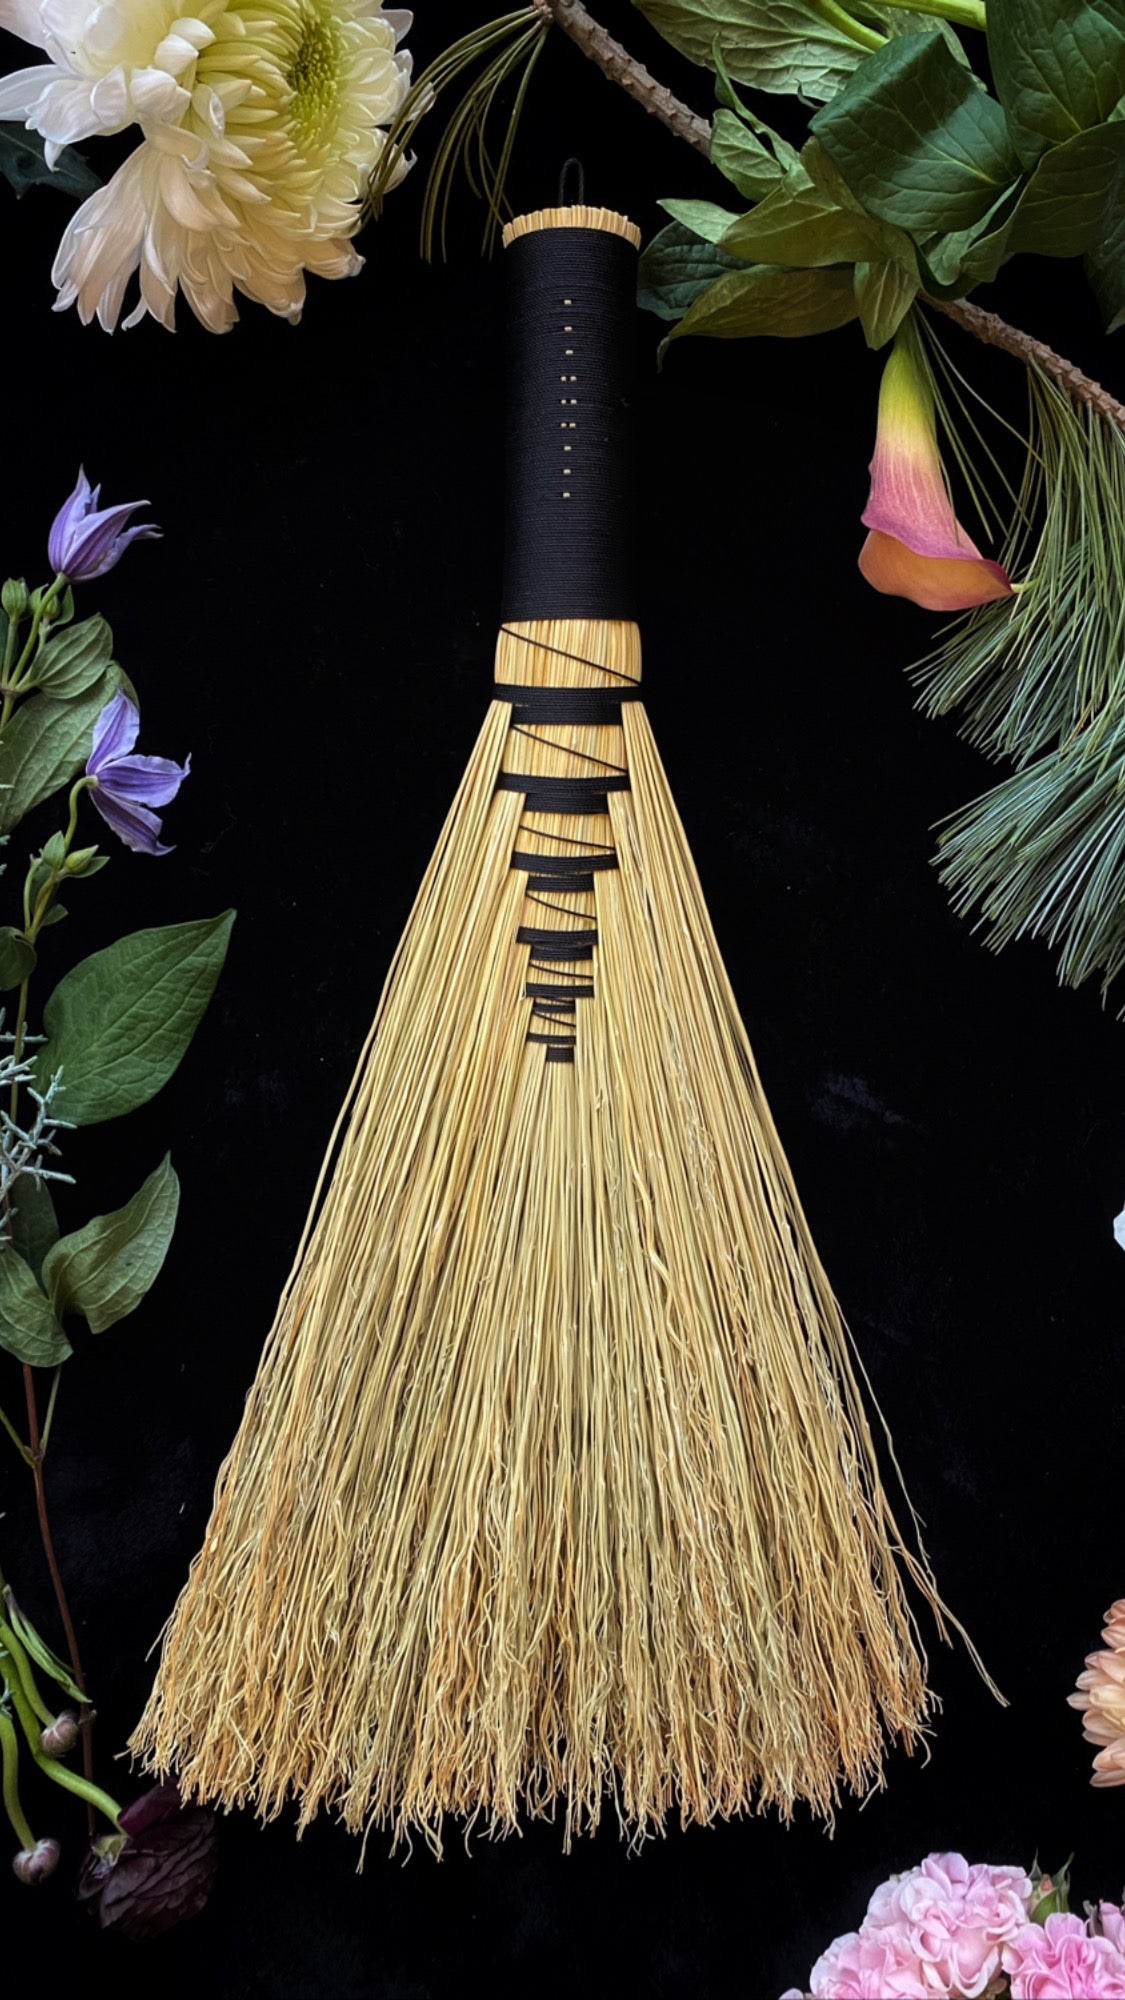 The Wrapped, Hand Wisk, Broom Making Workshop and Broom Kits - Online The House of Twigs Workshop - Keven Craft Rituals